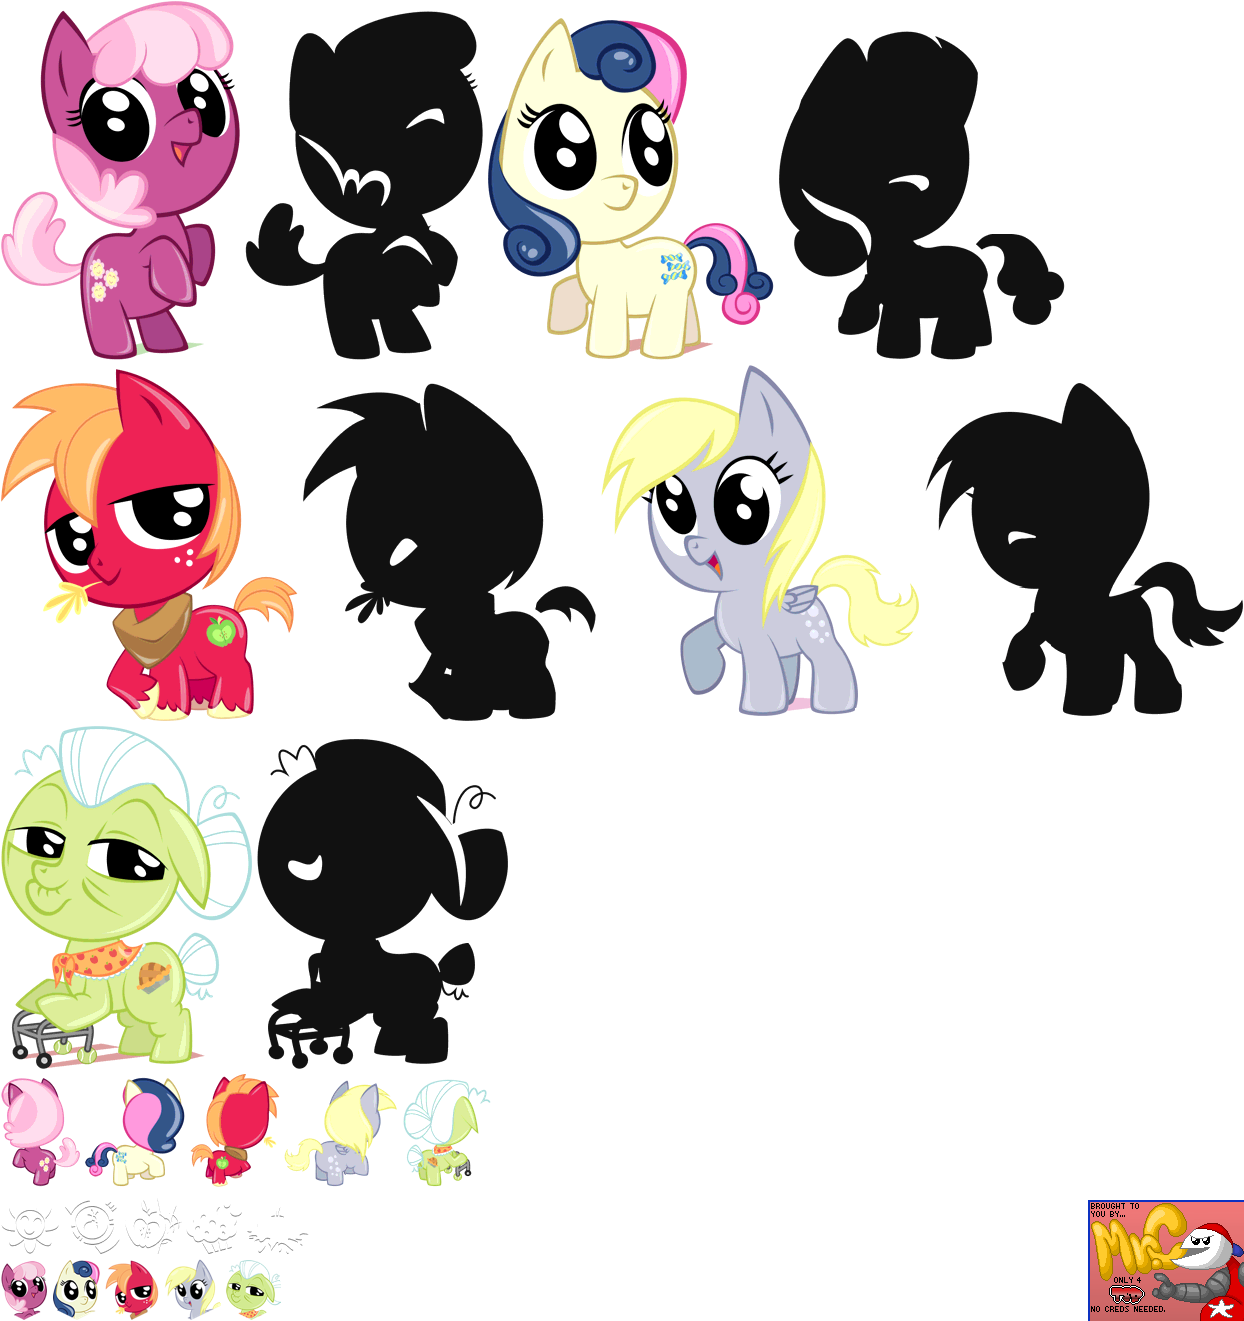 Residents of Ponyville